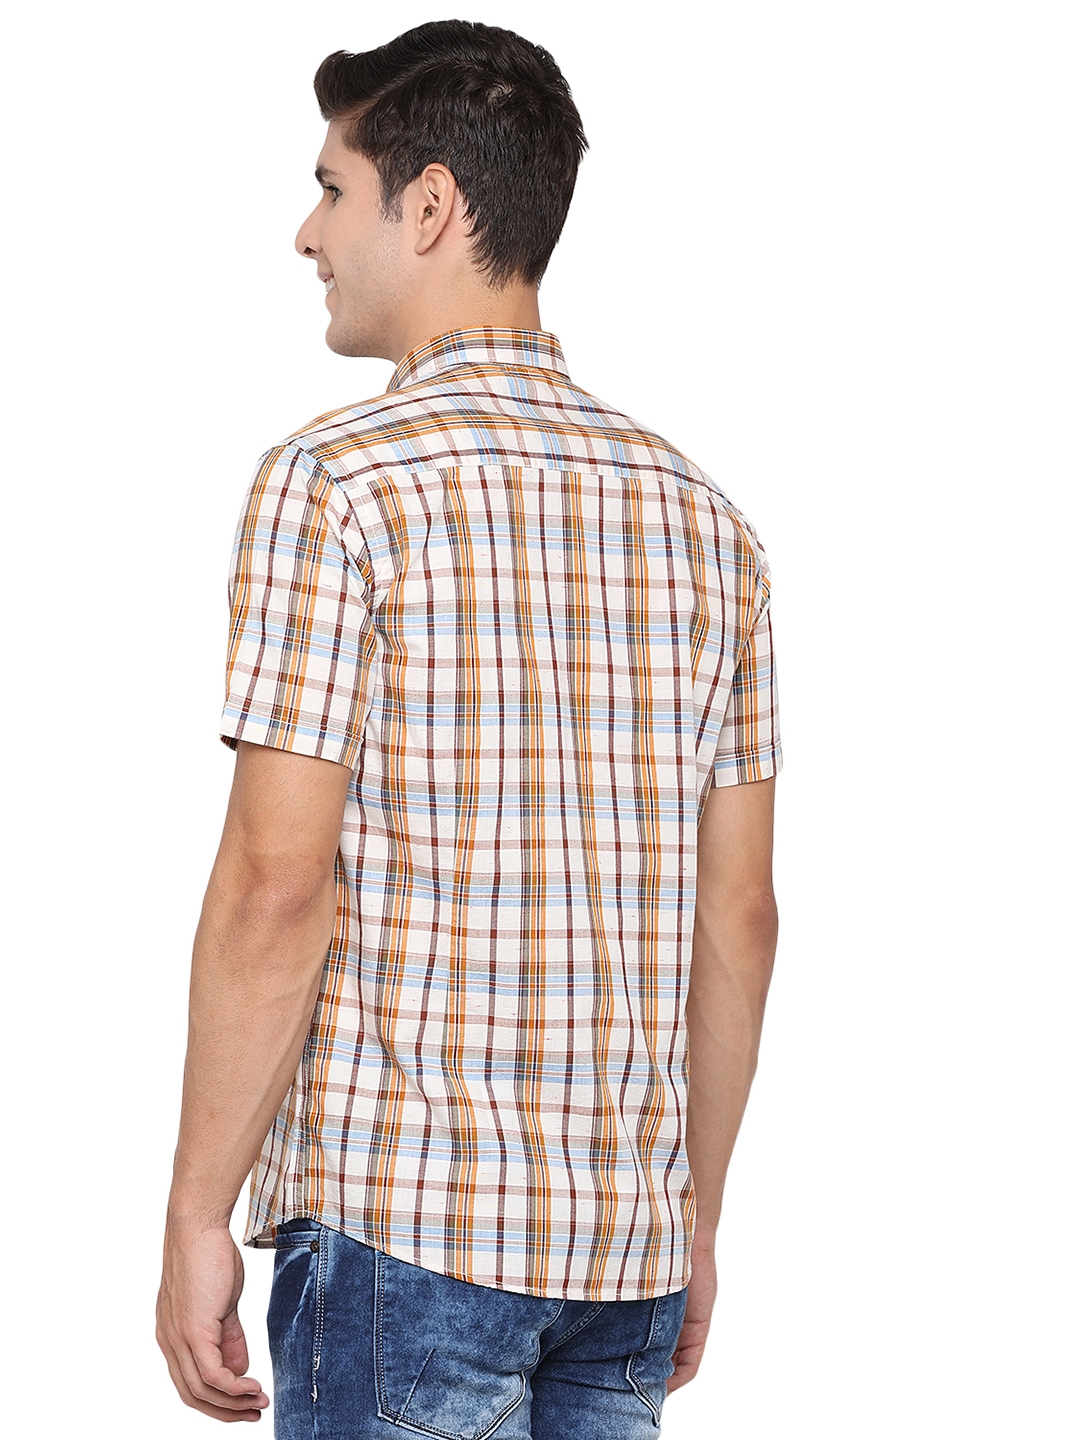 Greenfibre | Antique White Checked Slim Fit Casual Shirt | Greenfibre 2